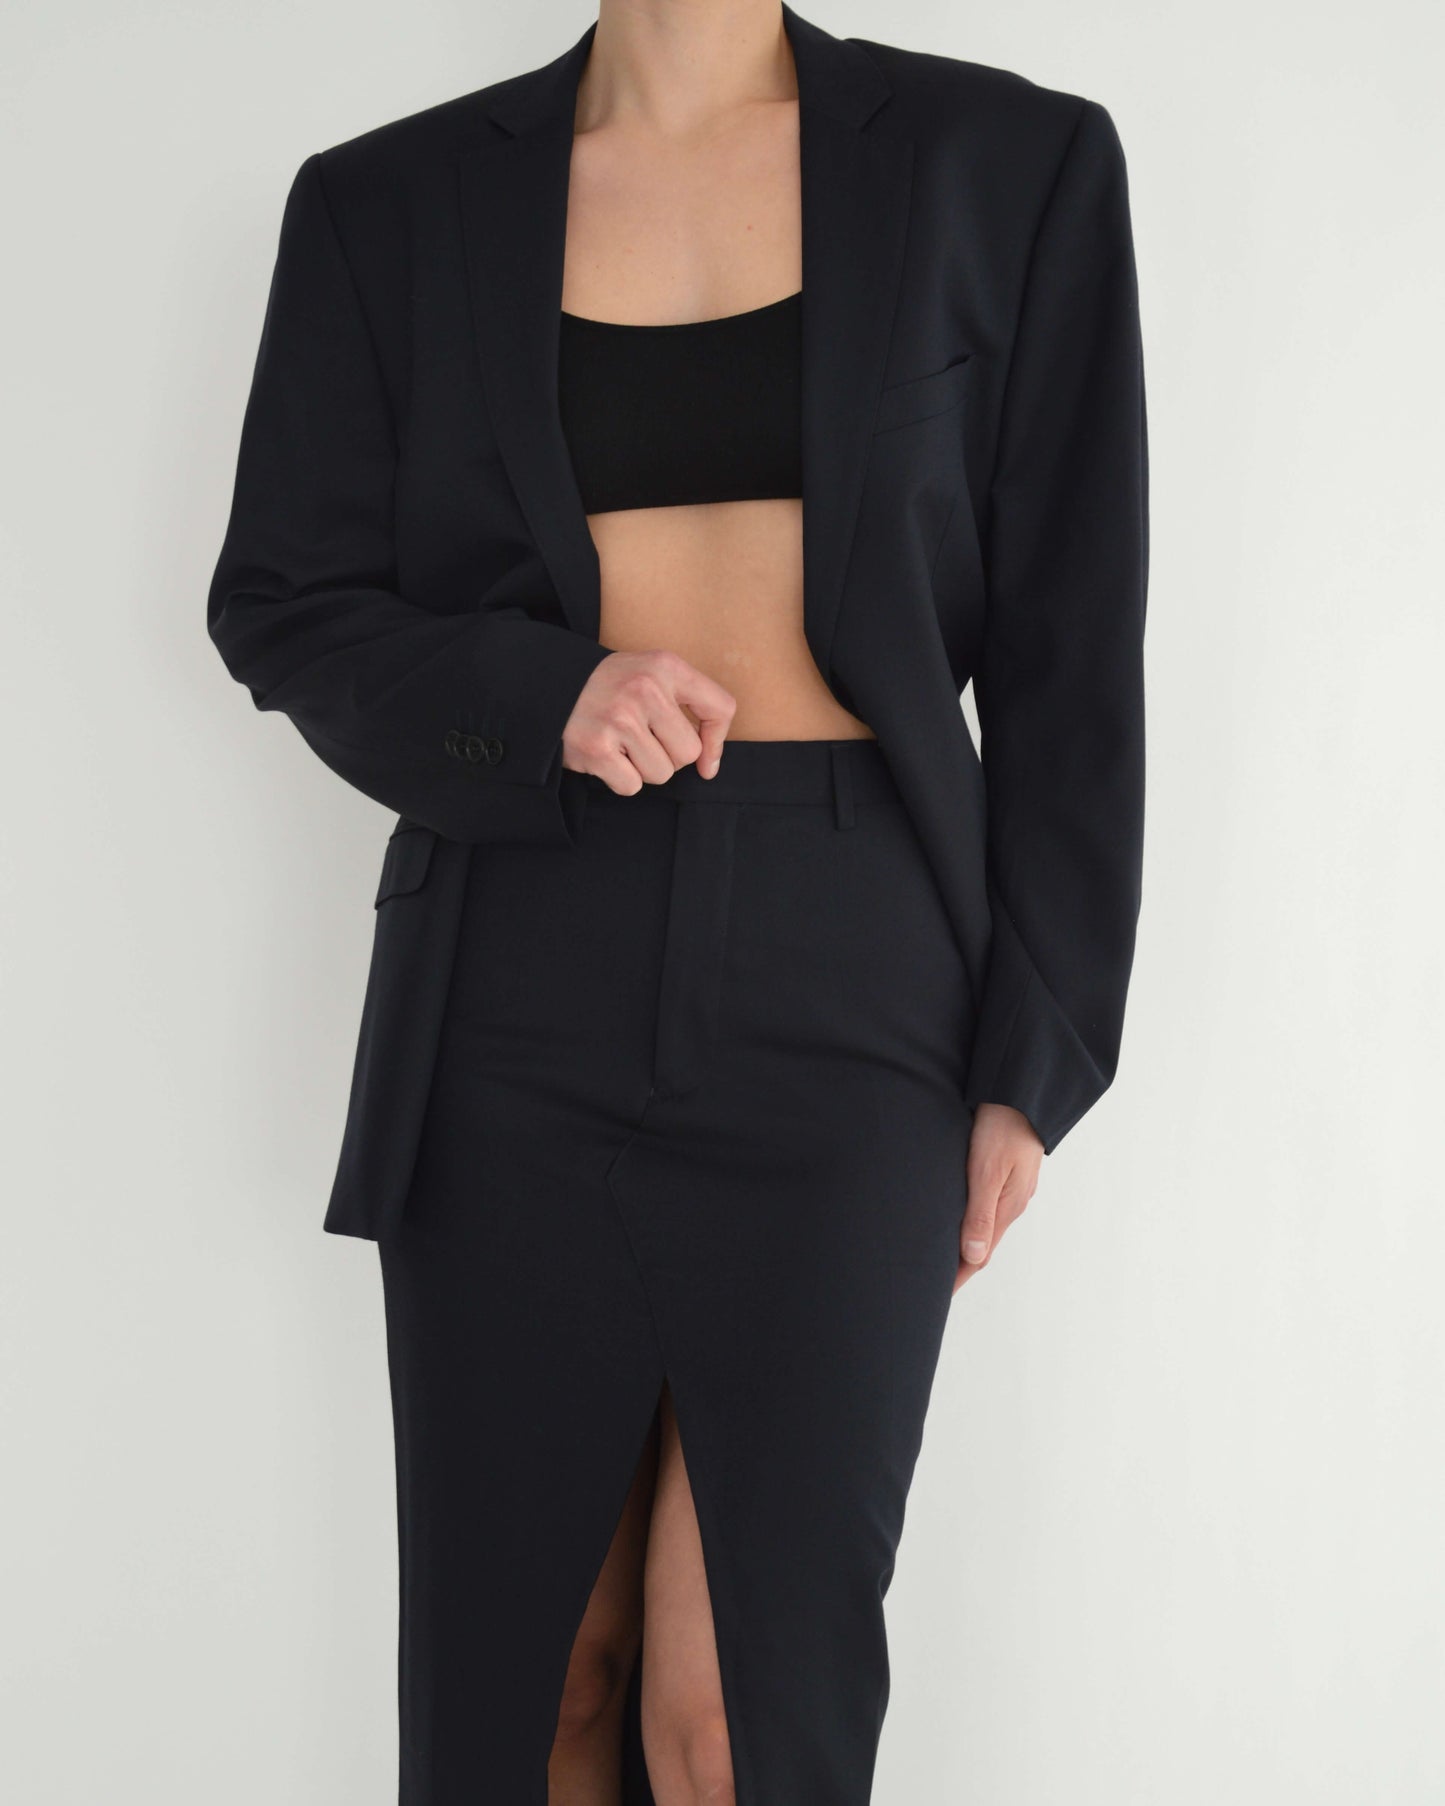 Skirt Suit - Navy Business (S/M)